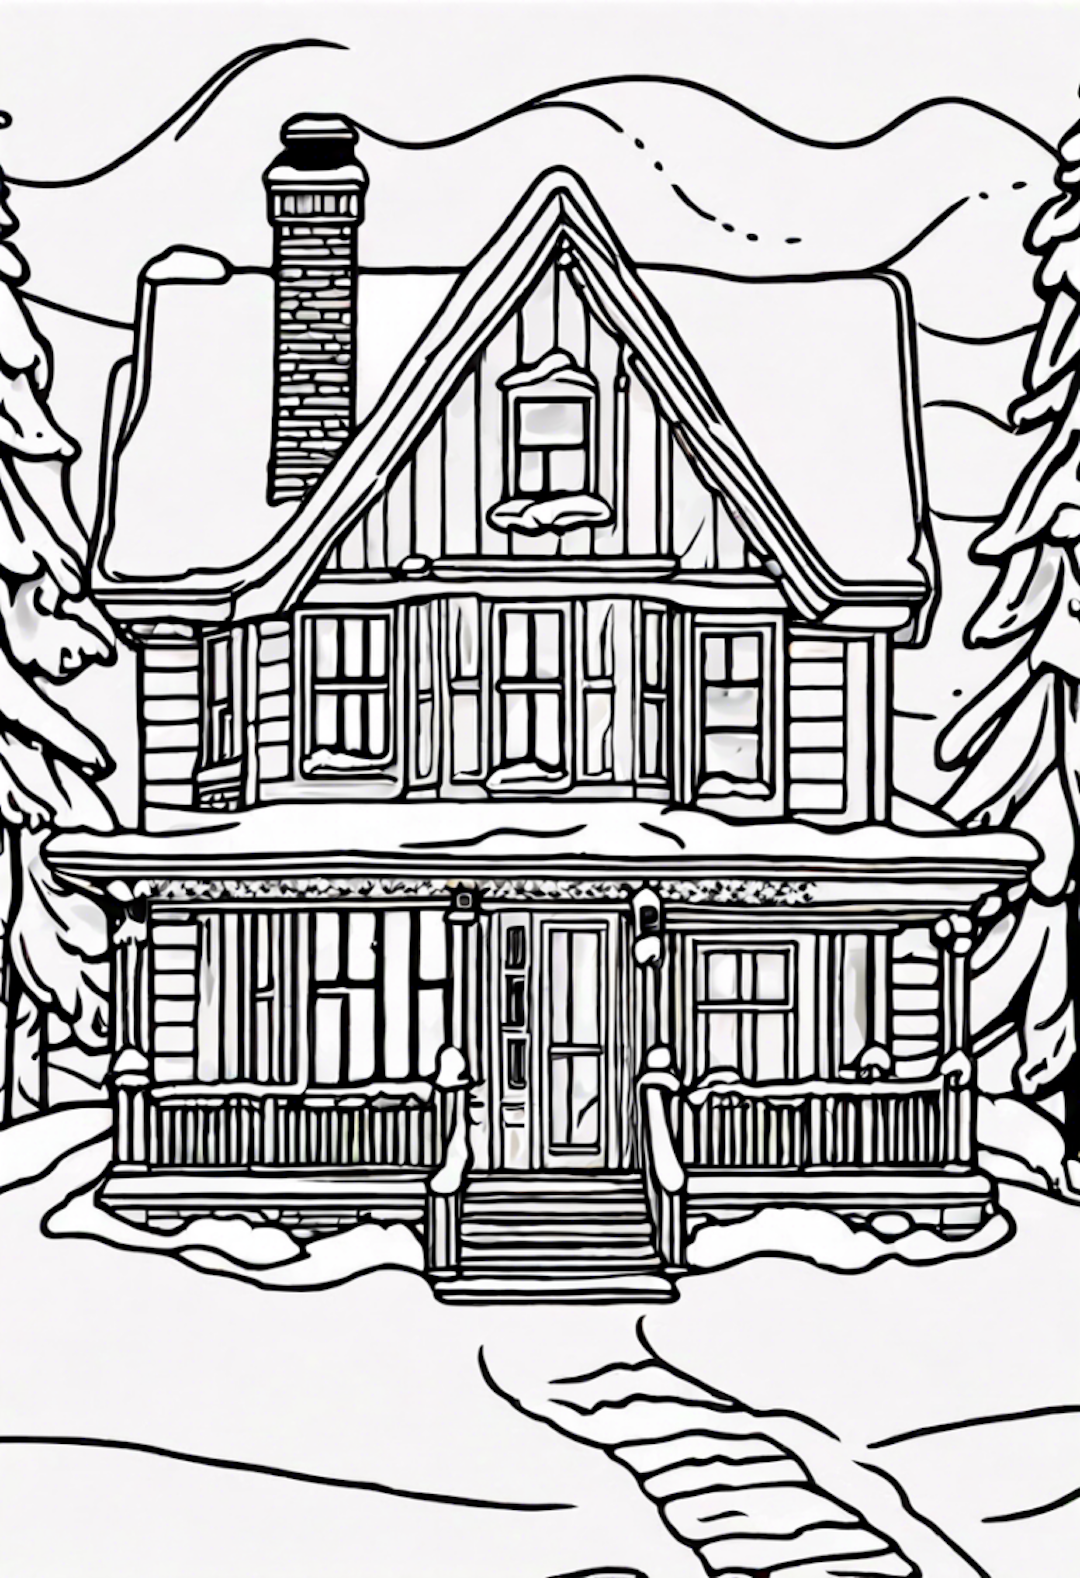 Cozy Snowy Cottage Coloring Page coloring pages